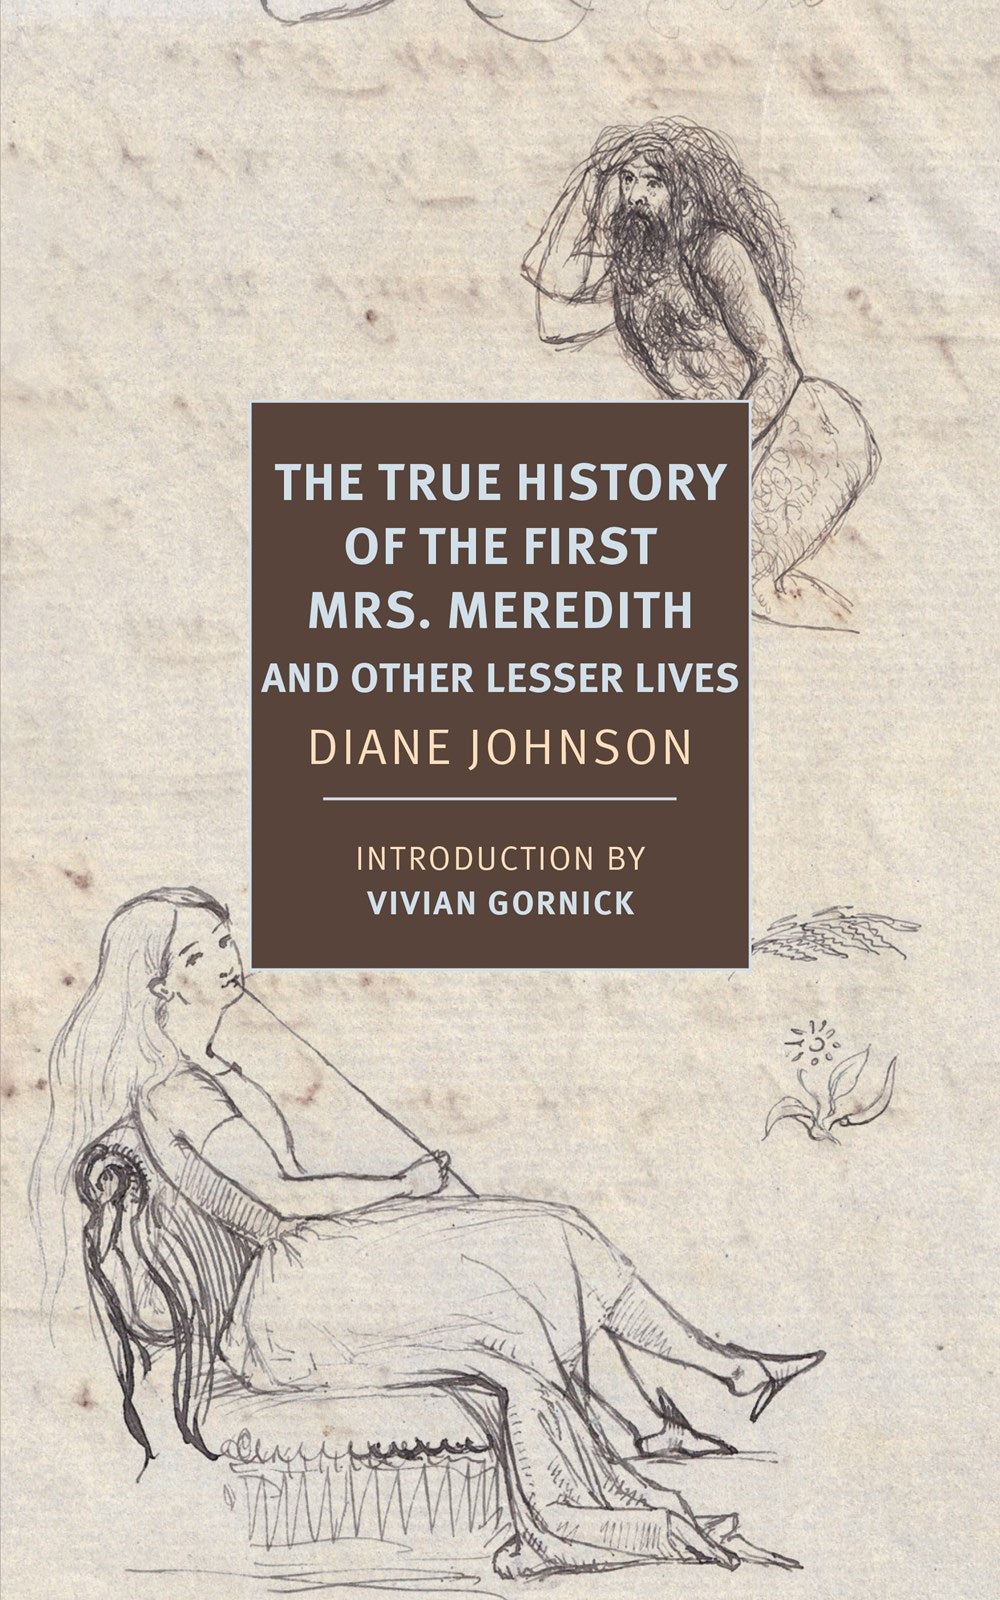 The True History of the First Mrs. Meredith and Other Lesser Lives by Diane Johnson (Introduction by Vivian Gornick)